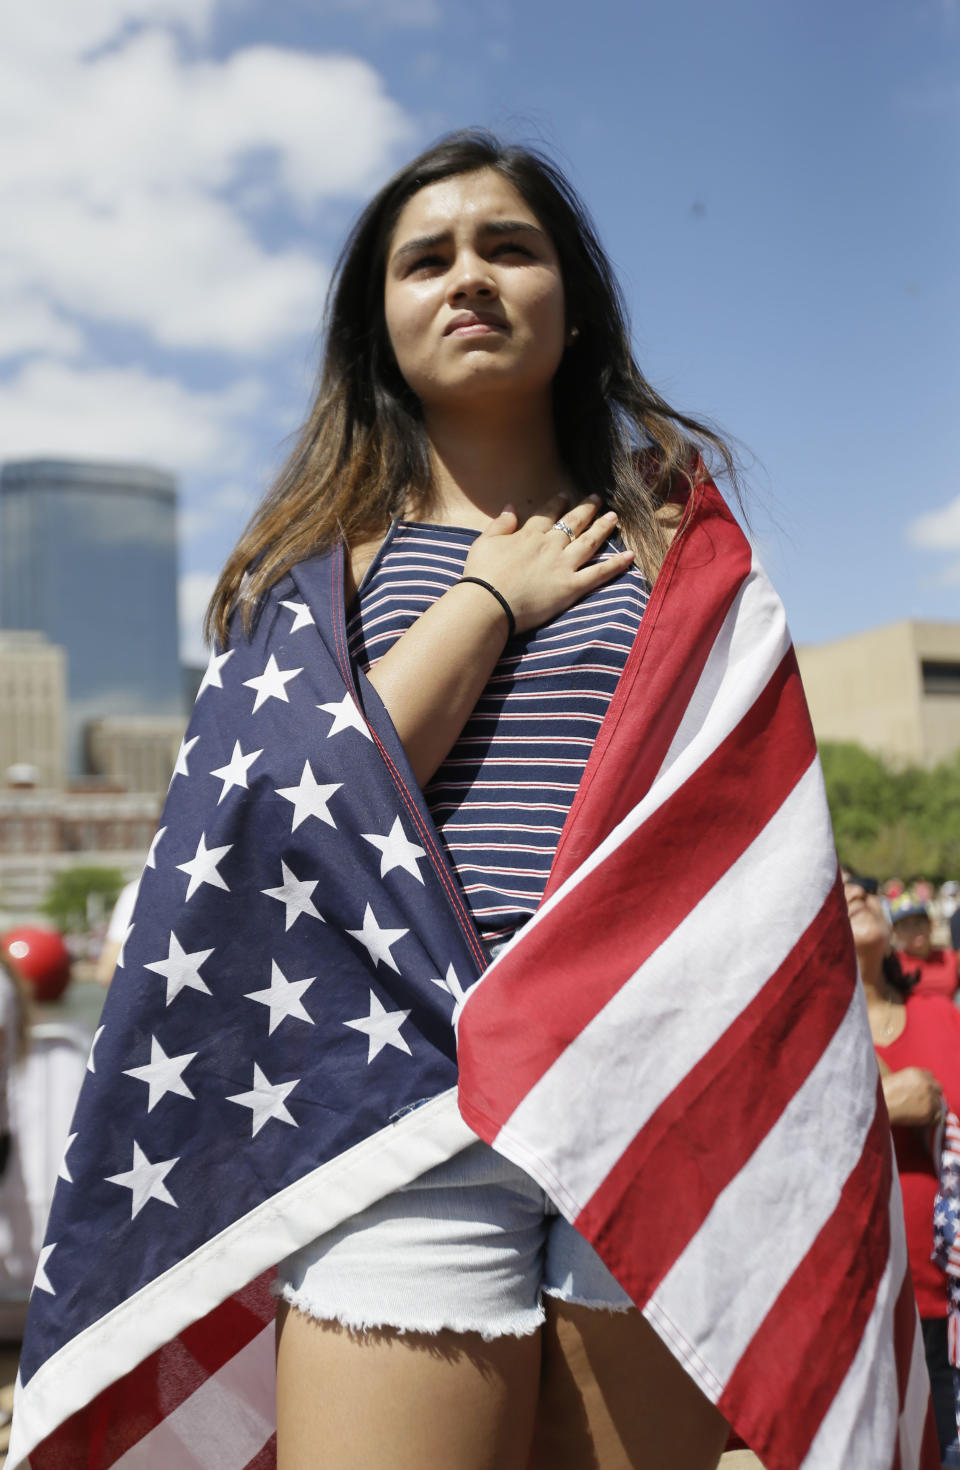 High school student Leslie Bonilla, 17, stands during the national anthem as protestors rally in downtown Dallas, Sunday, April 9, 2017. Thousands of people are marching and rallying in downtown Dallas to call for an overhaul of the nation's immigration system and end to what organizers say is an aggressive deportation policy. (AP Photo/LM Otero)